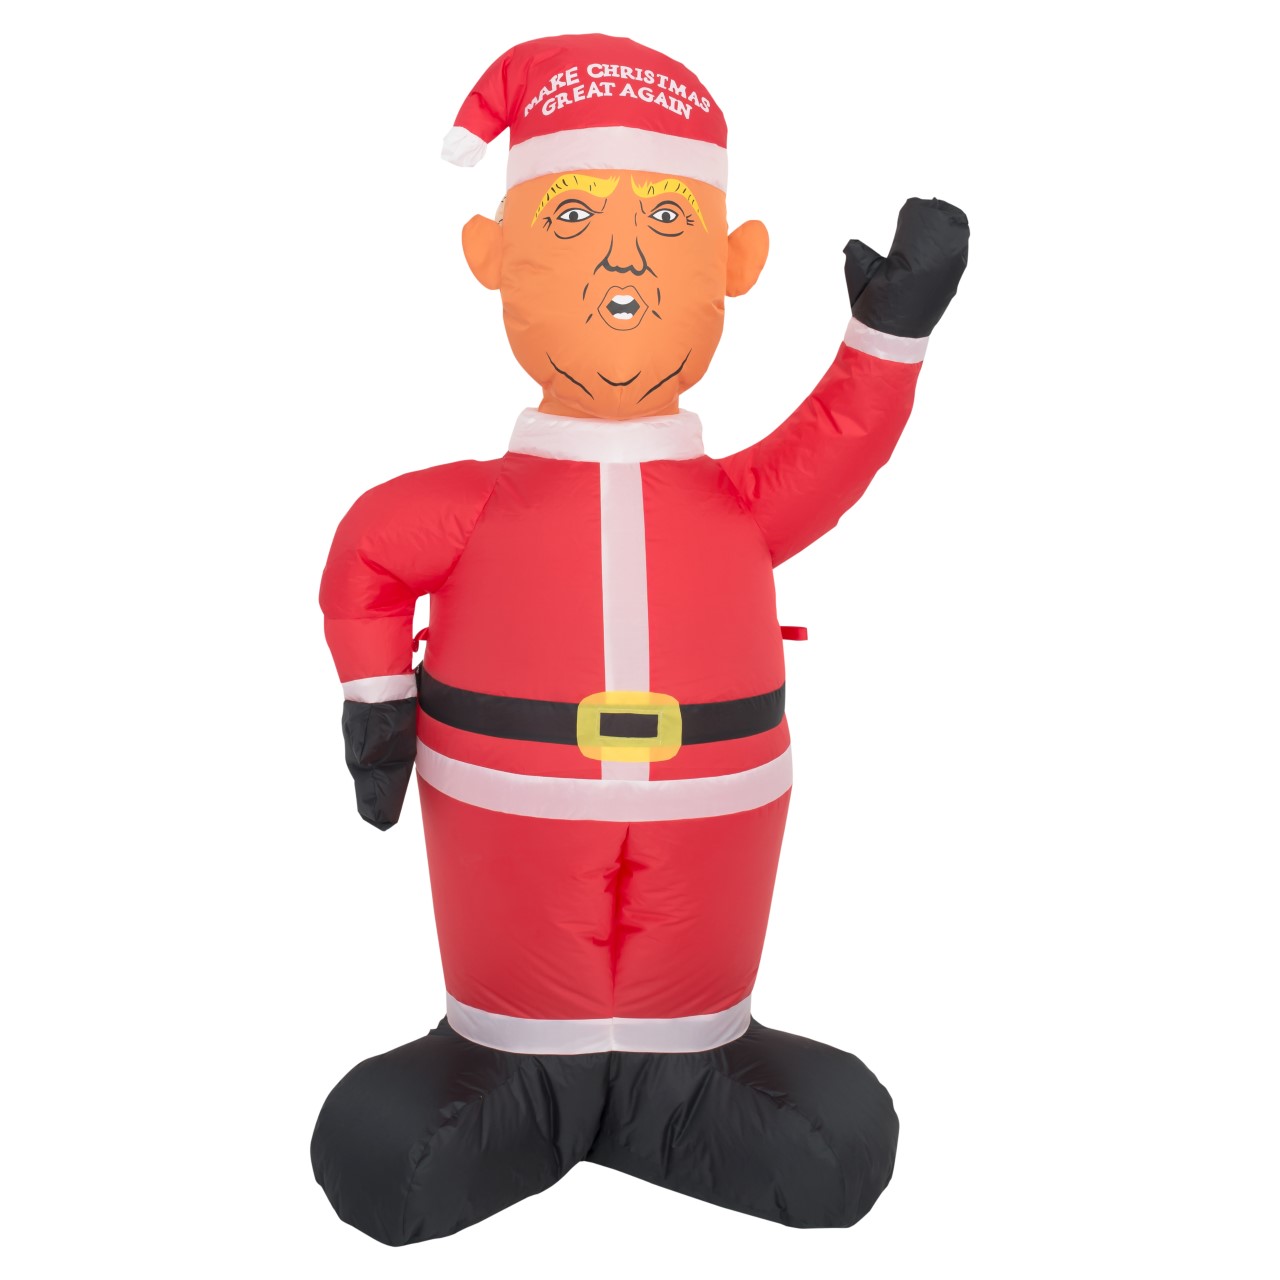 Donald Trump Make Christmas Great Again Lawn Inflatable,Specials : uglyschristmassweater.com